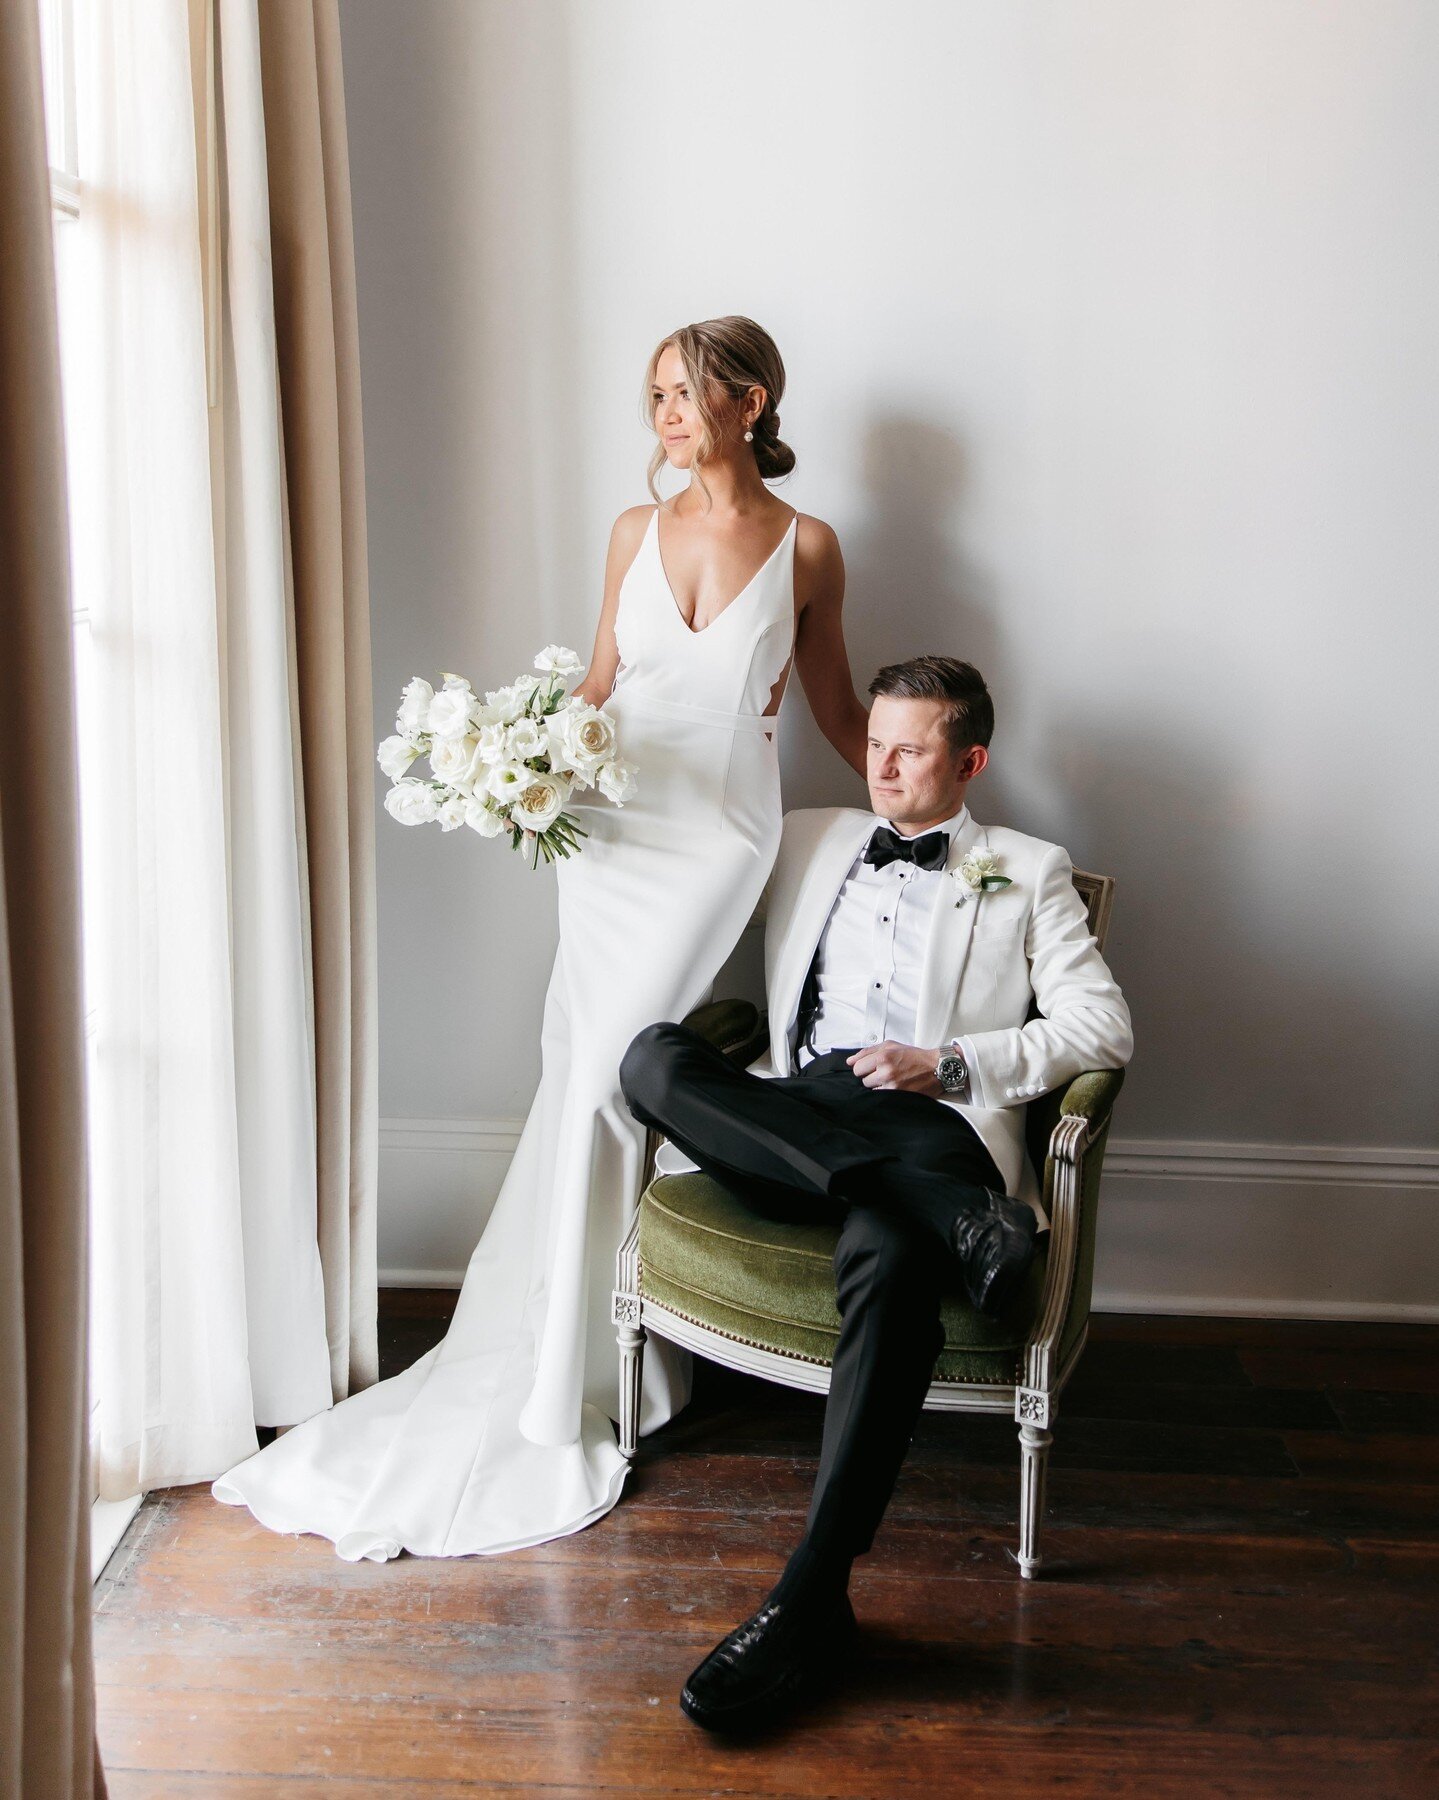 We love a neutral color palette!
. . . 
Garet is wearing an ivory dinner jacket to perfectly compliment his bride at their stunning New Orleans nuptials! 
#bespoke #menswear #groom #mensfashion